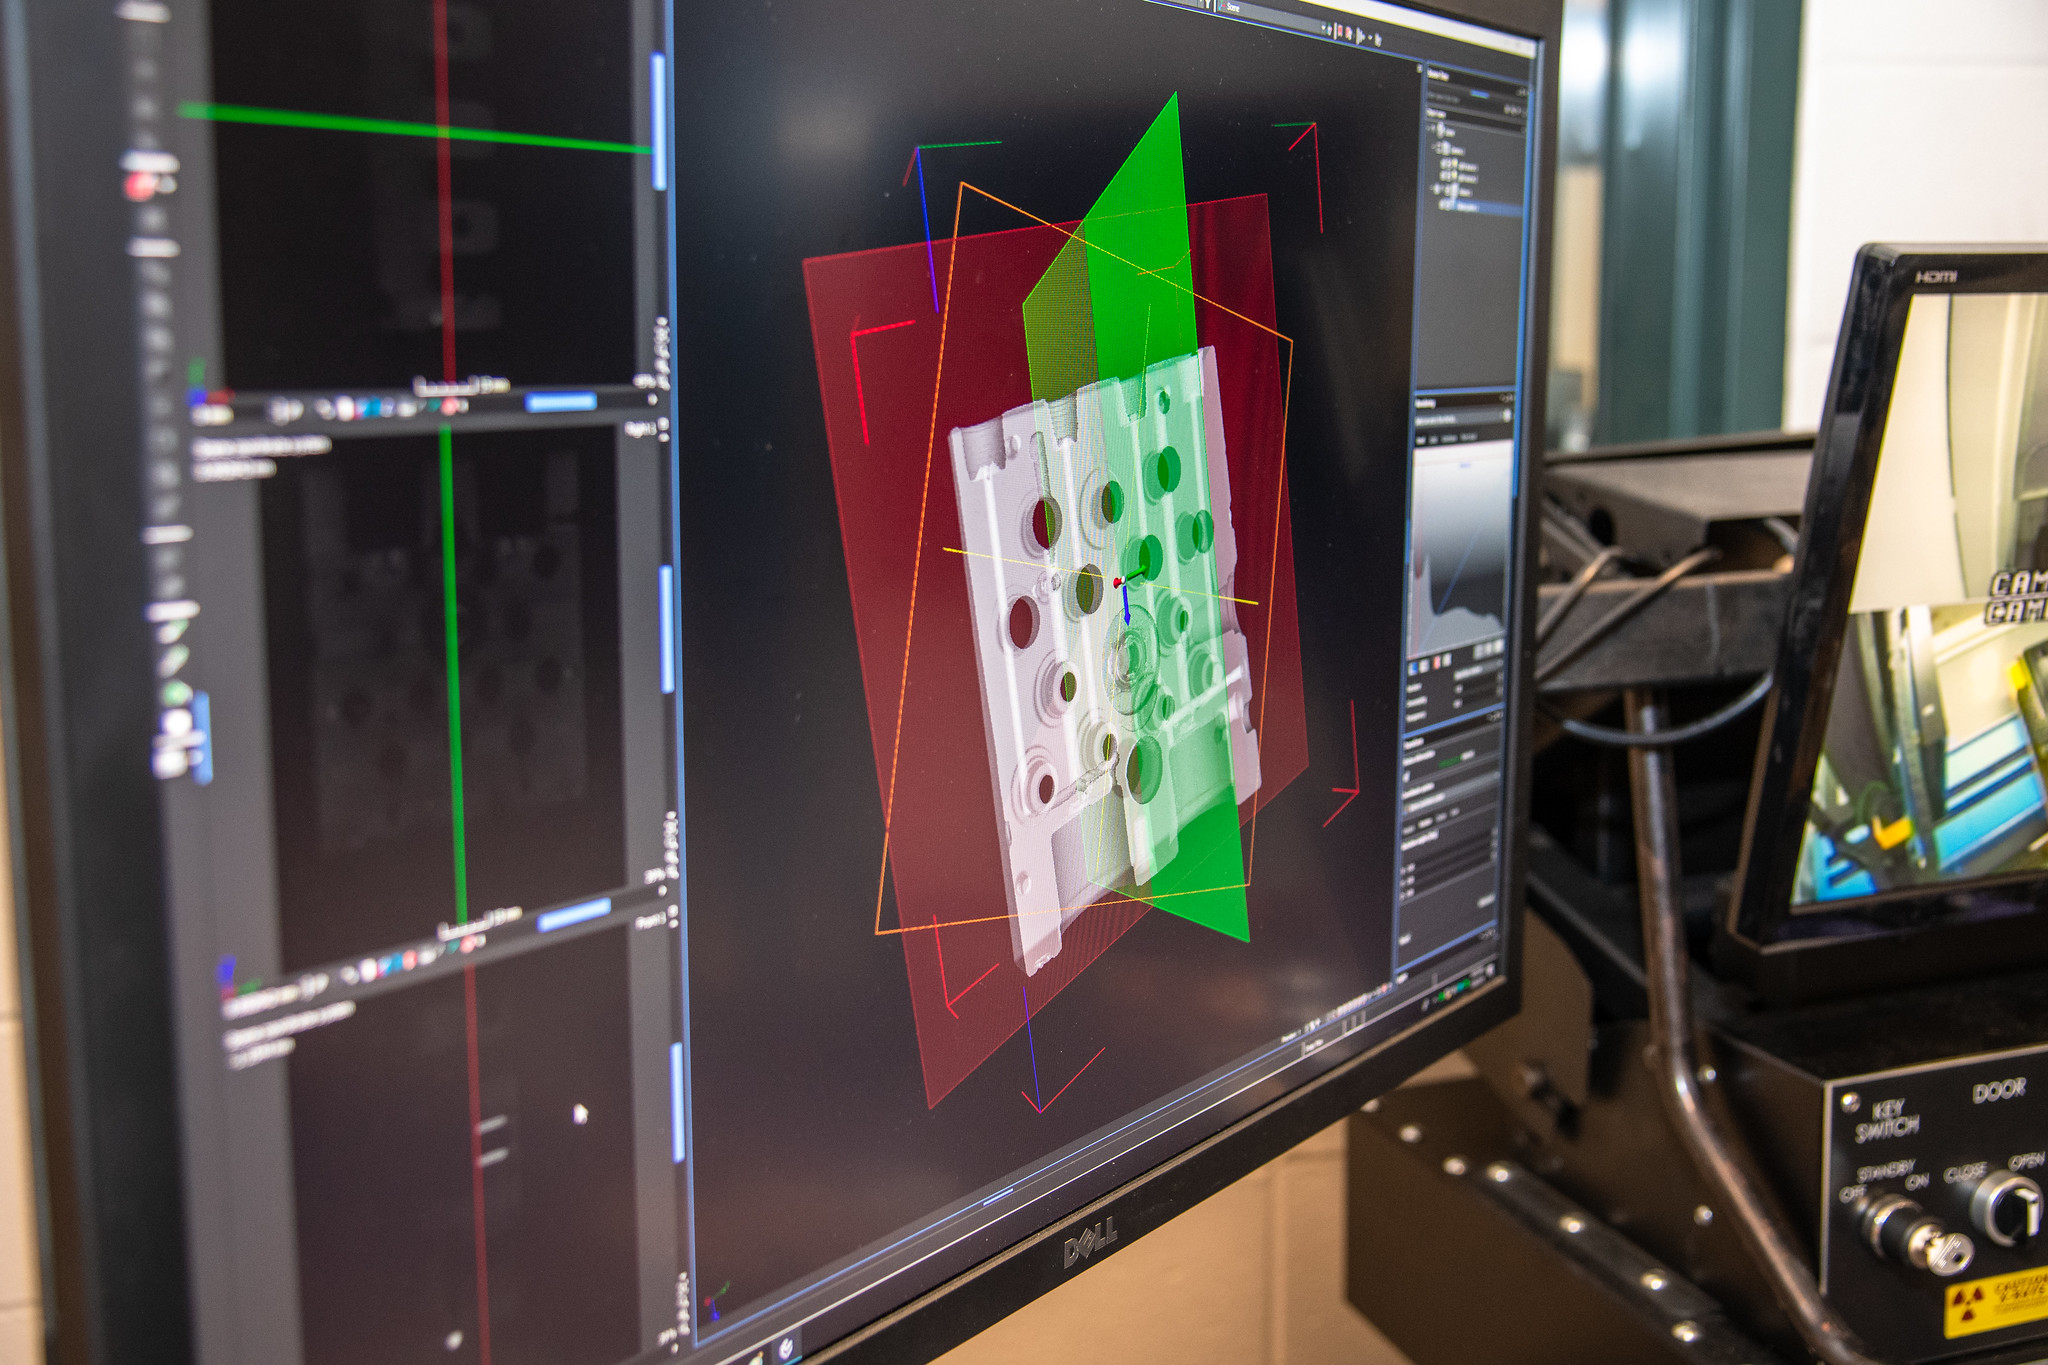 3D rendering of an antilock braking system imaged by the X-ray CT system. Red and green planes represent slices and sections from different viewpoints used to observes the part's internal structure. Photo via Auburn University